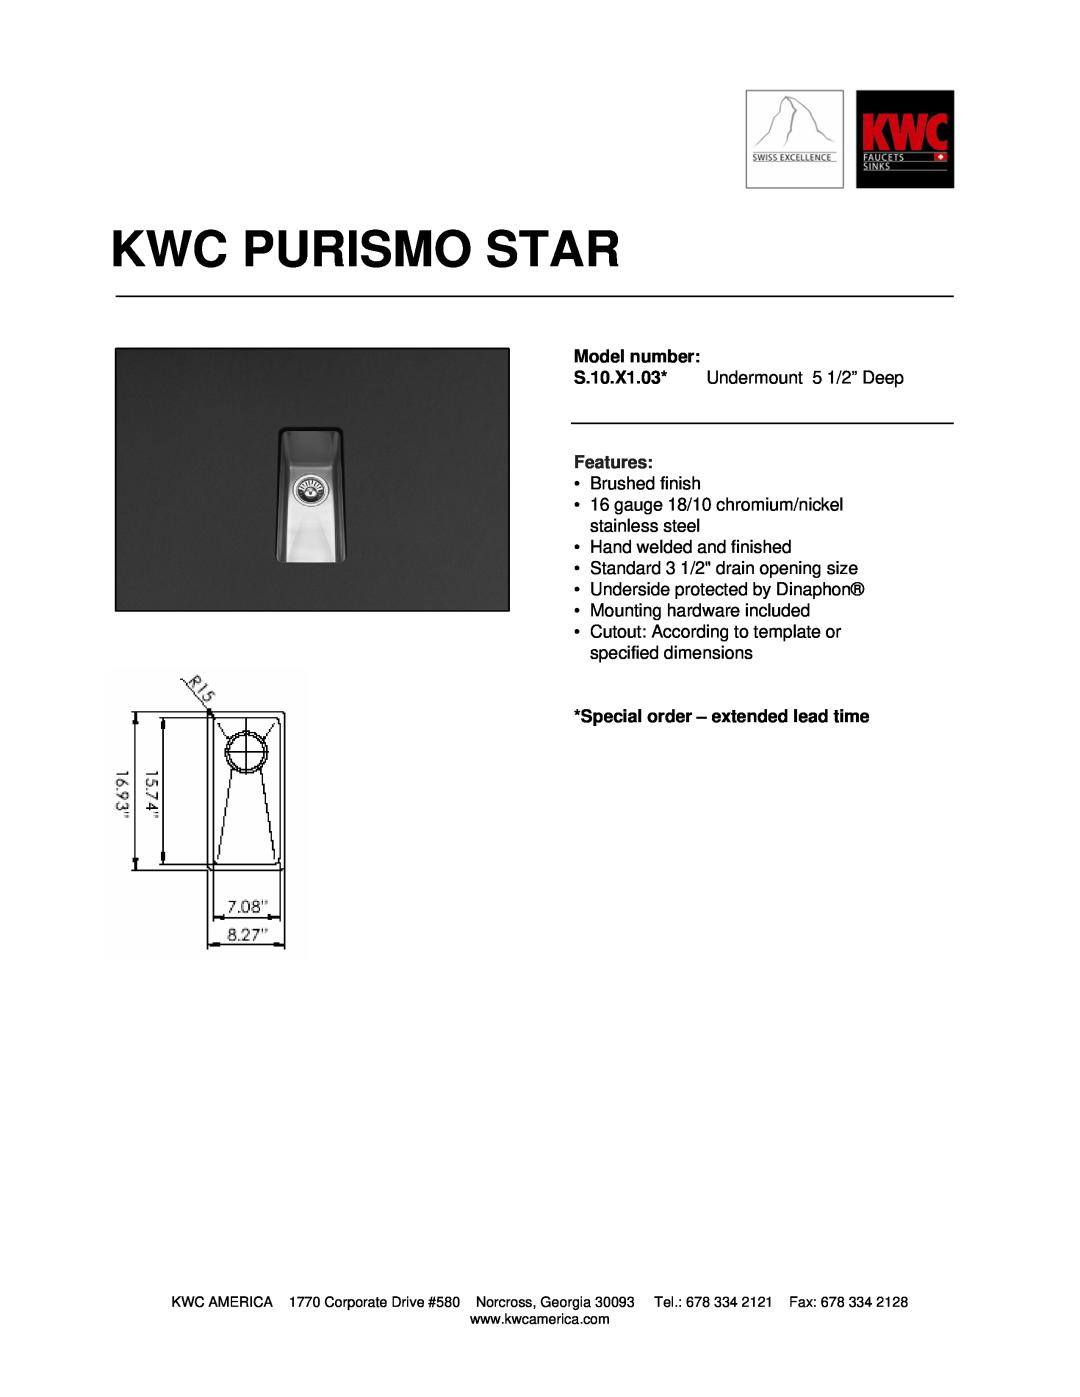 KWC S.10.X1.03 dimensions Kwc Purismo Star, Model number, Features, Special order - extended lead time 